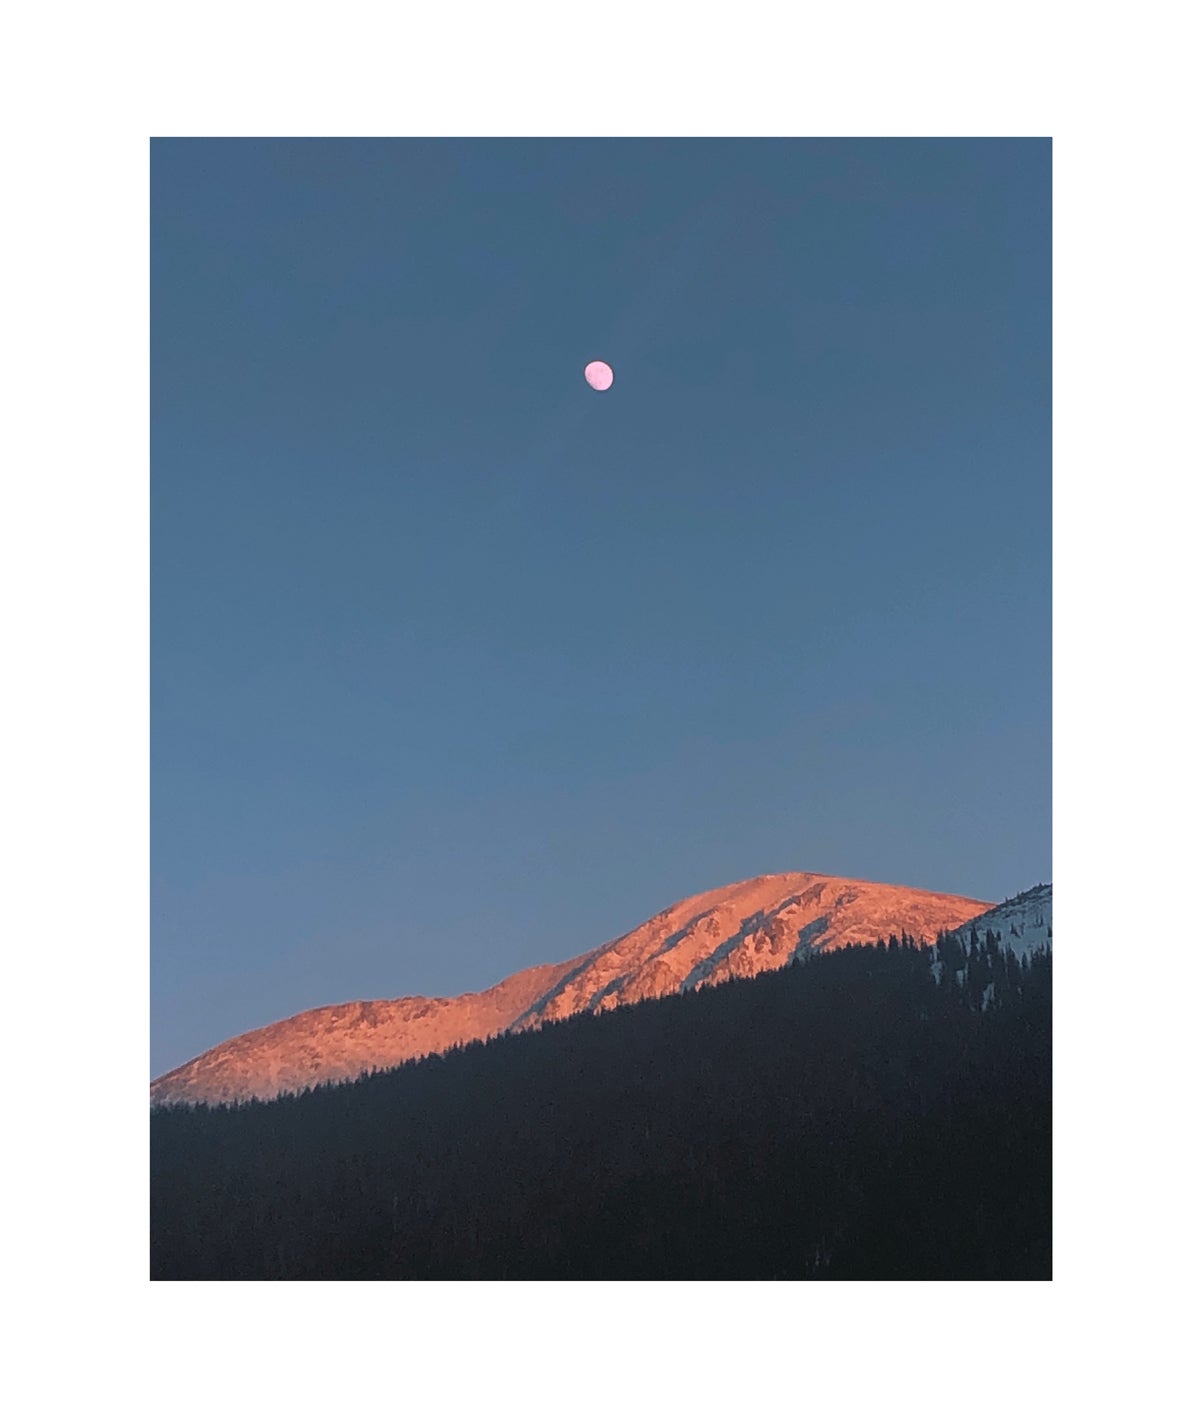 Photo of moon above snow-capped mountains by Molly Olwig